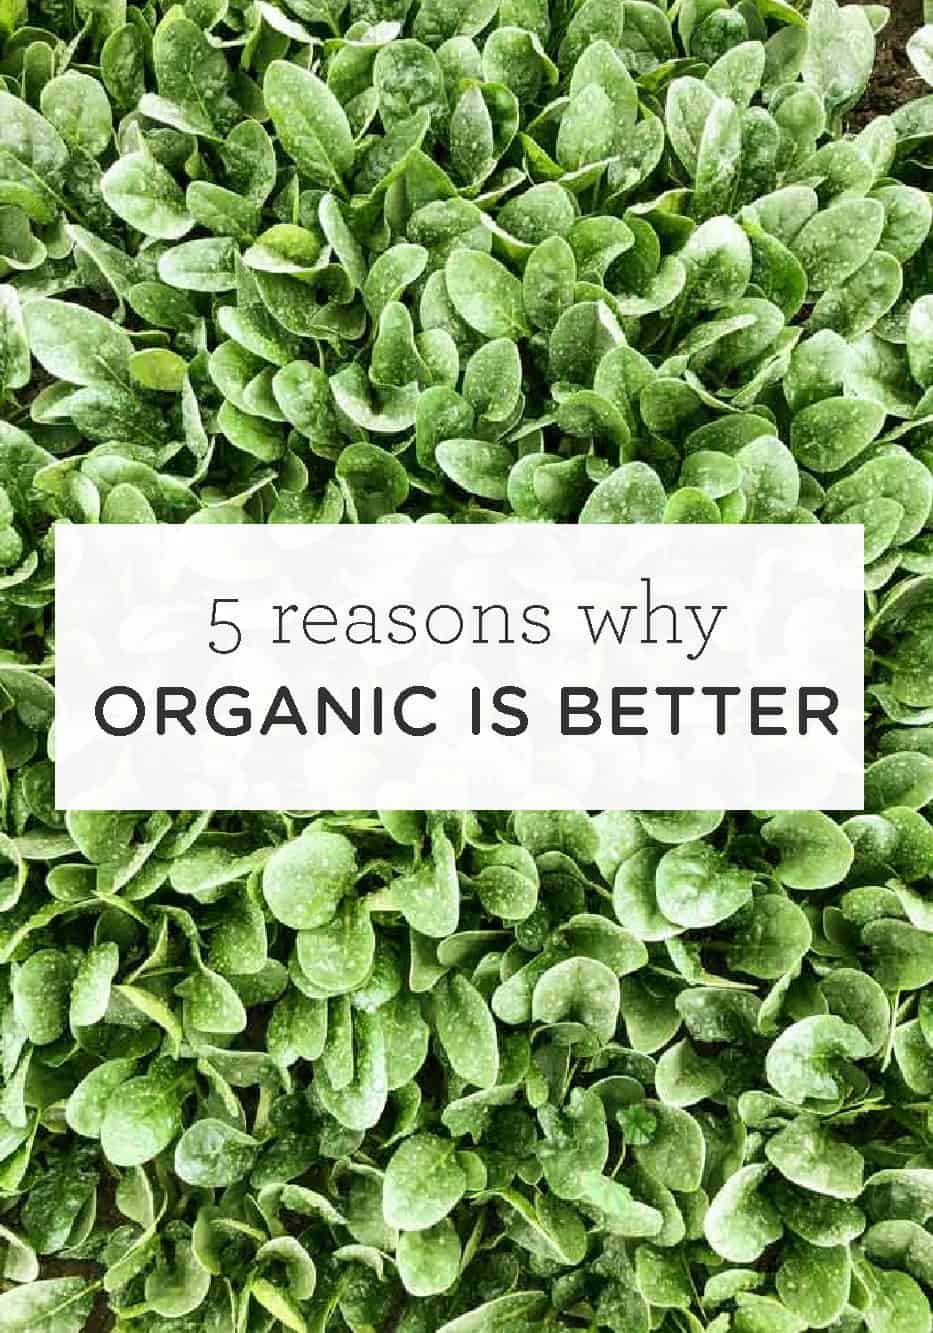 Why Organic is Better